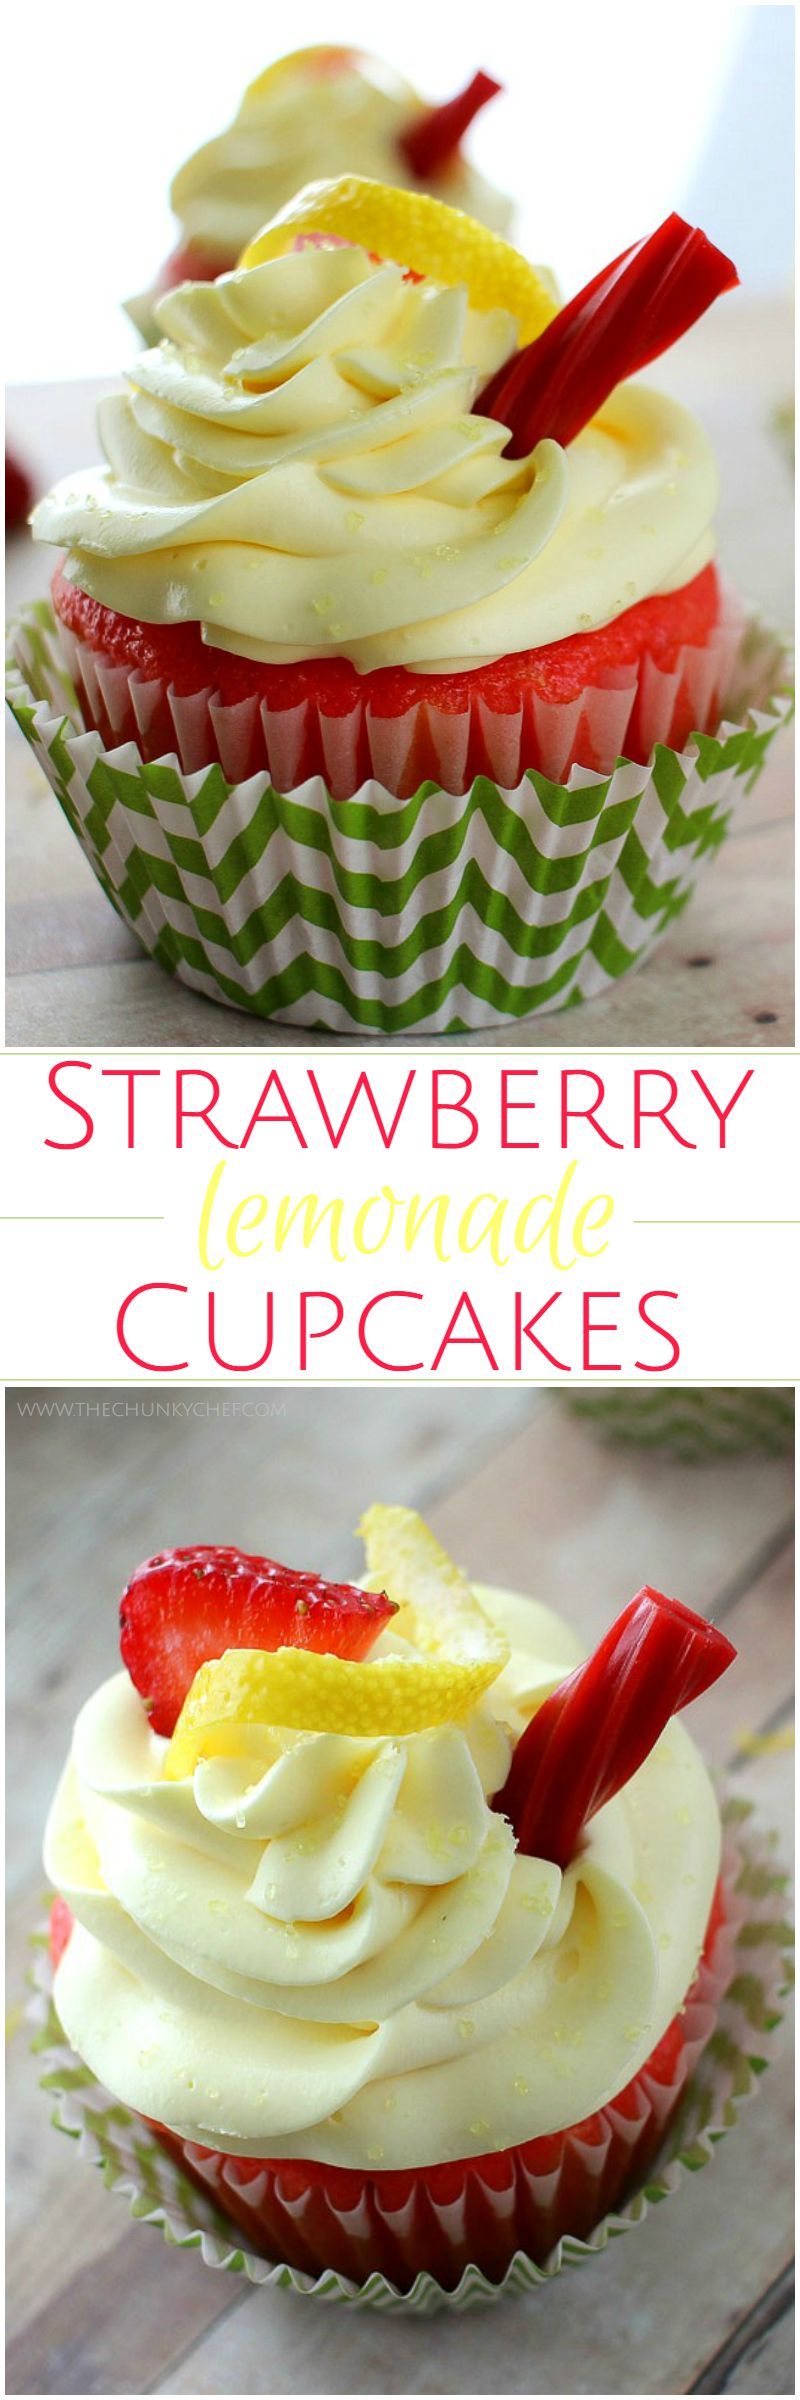 Deliciously moist with a few surprise ingredients, you have to try these strawberry lemonade cupcakes! It's like taking a bite out of summer :)